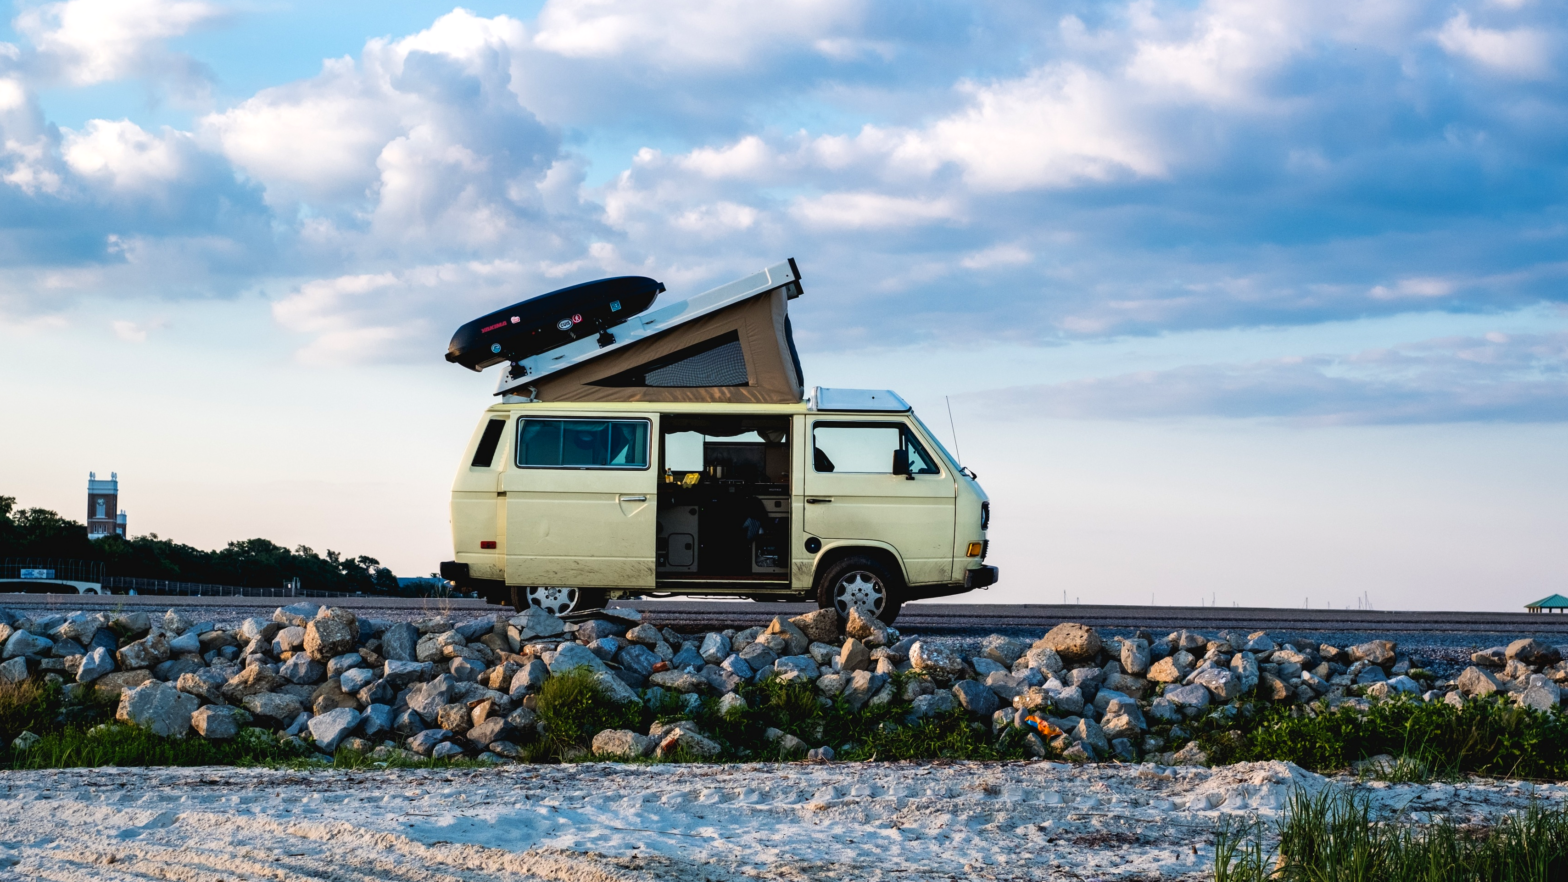 Optimizing VW Vanagon Conversions with LizardSkin Sound Control